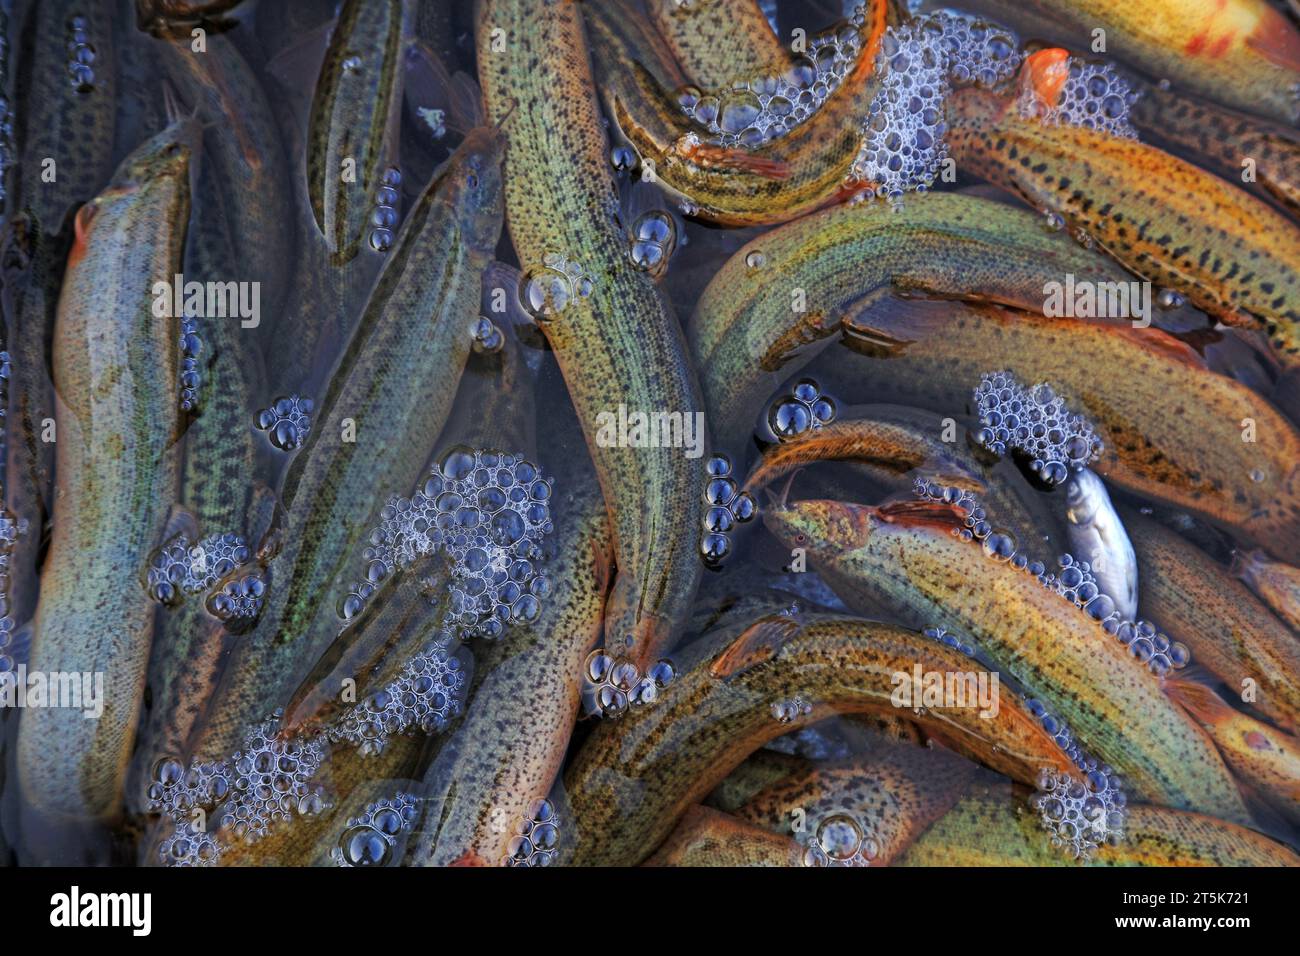 Piles of loach fish Stock Photo